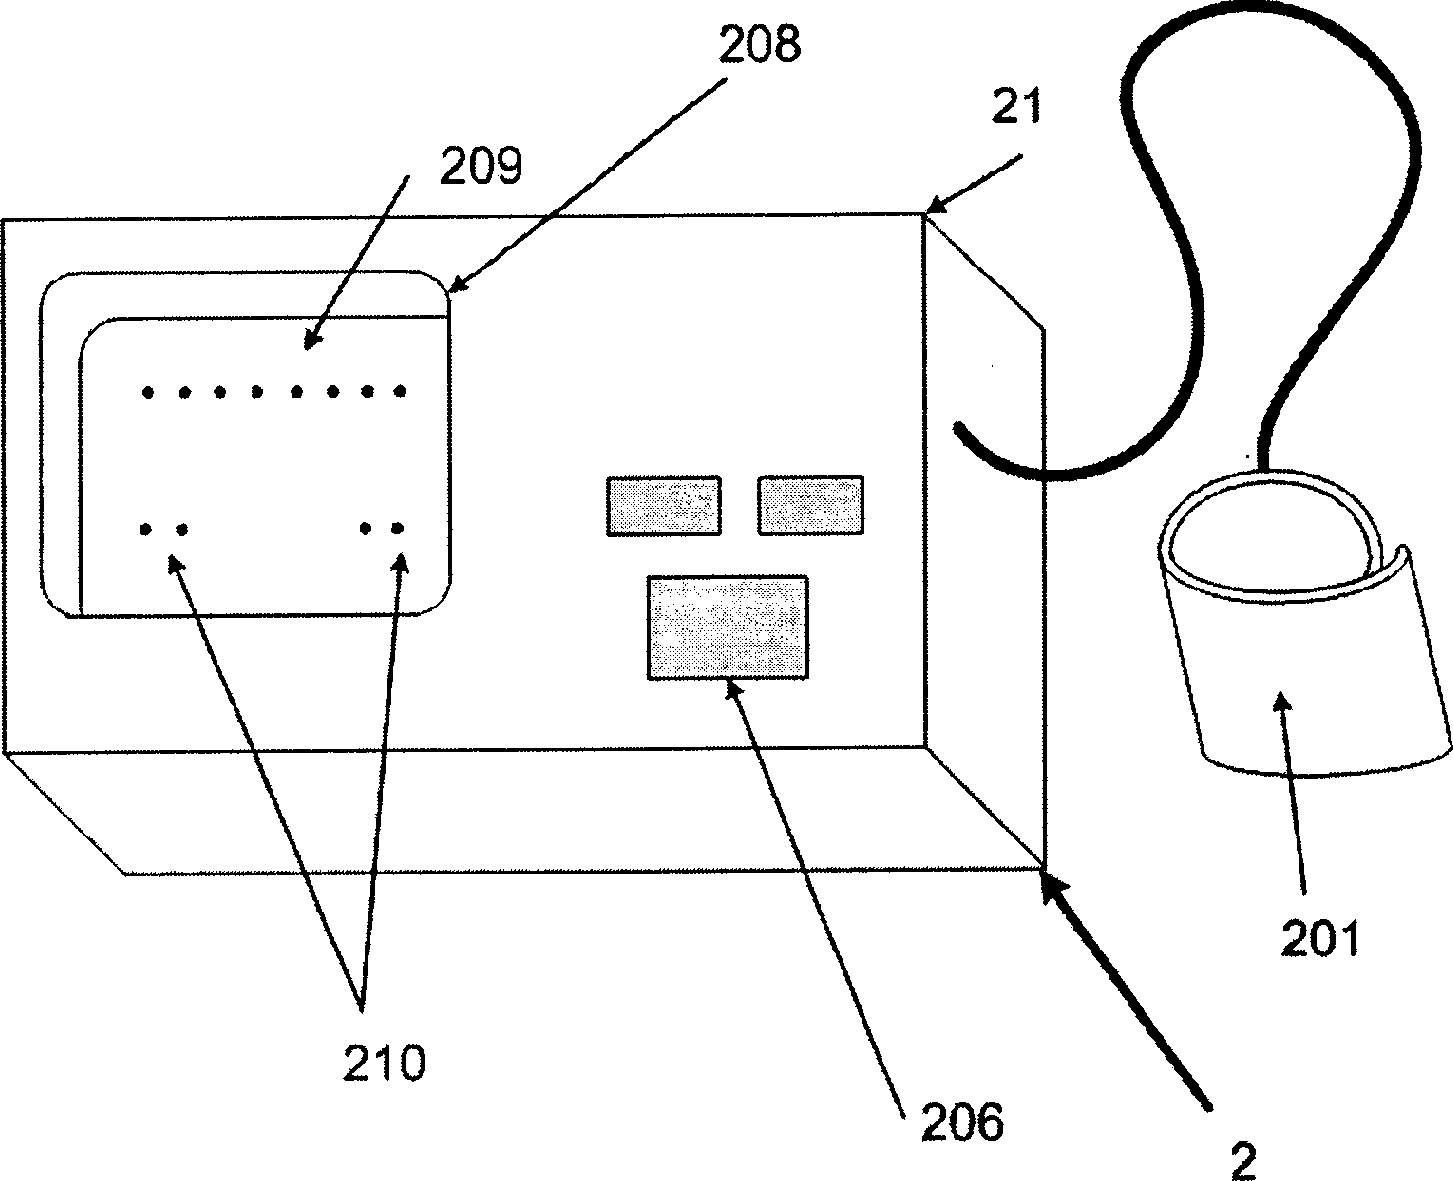 Non-invading blood pressure metering device and method